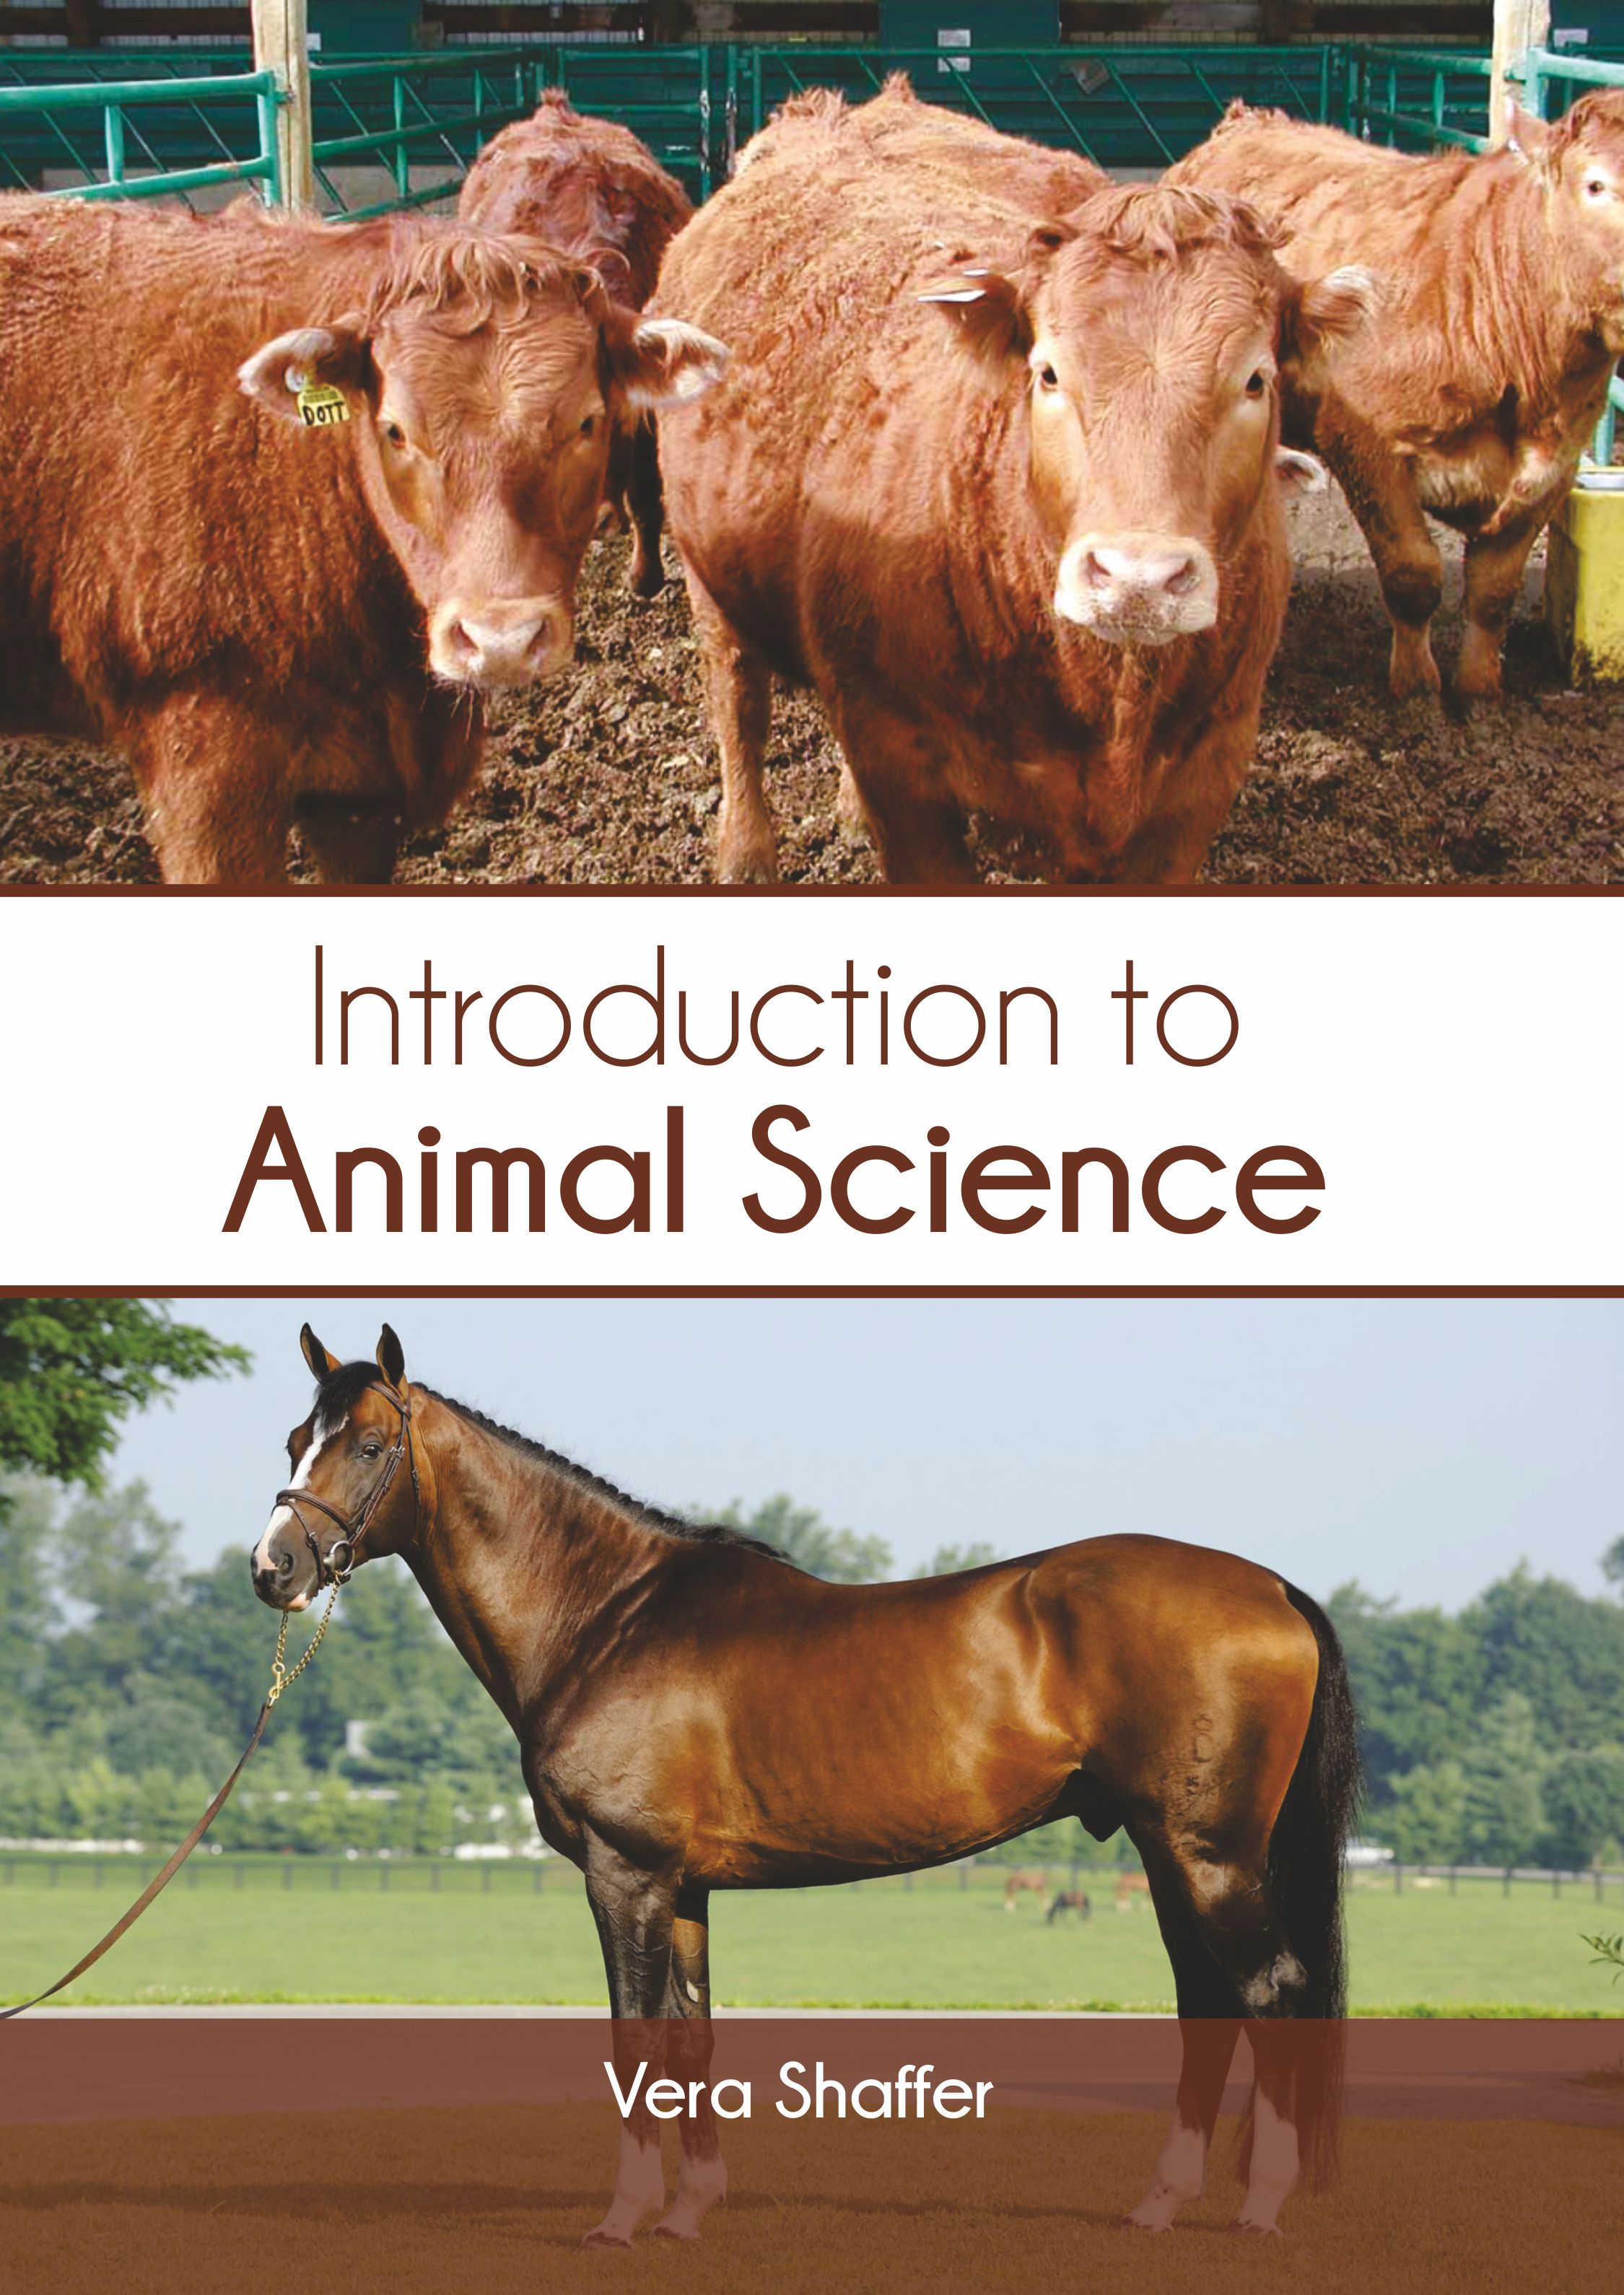 Introduction to livestock and companion animals